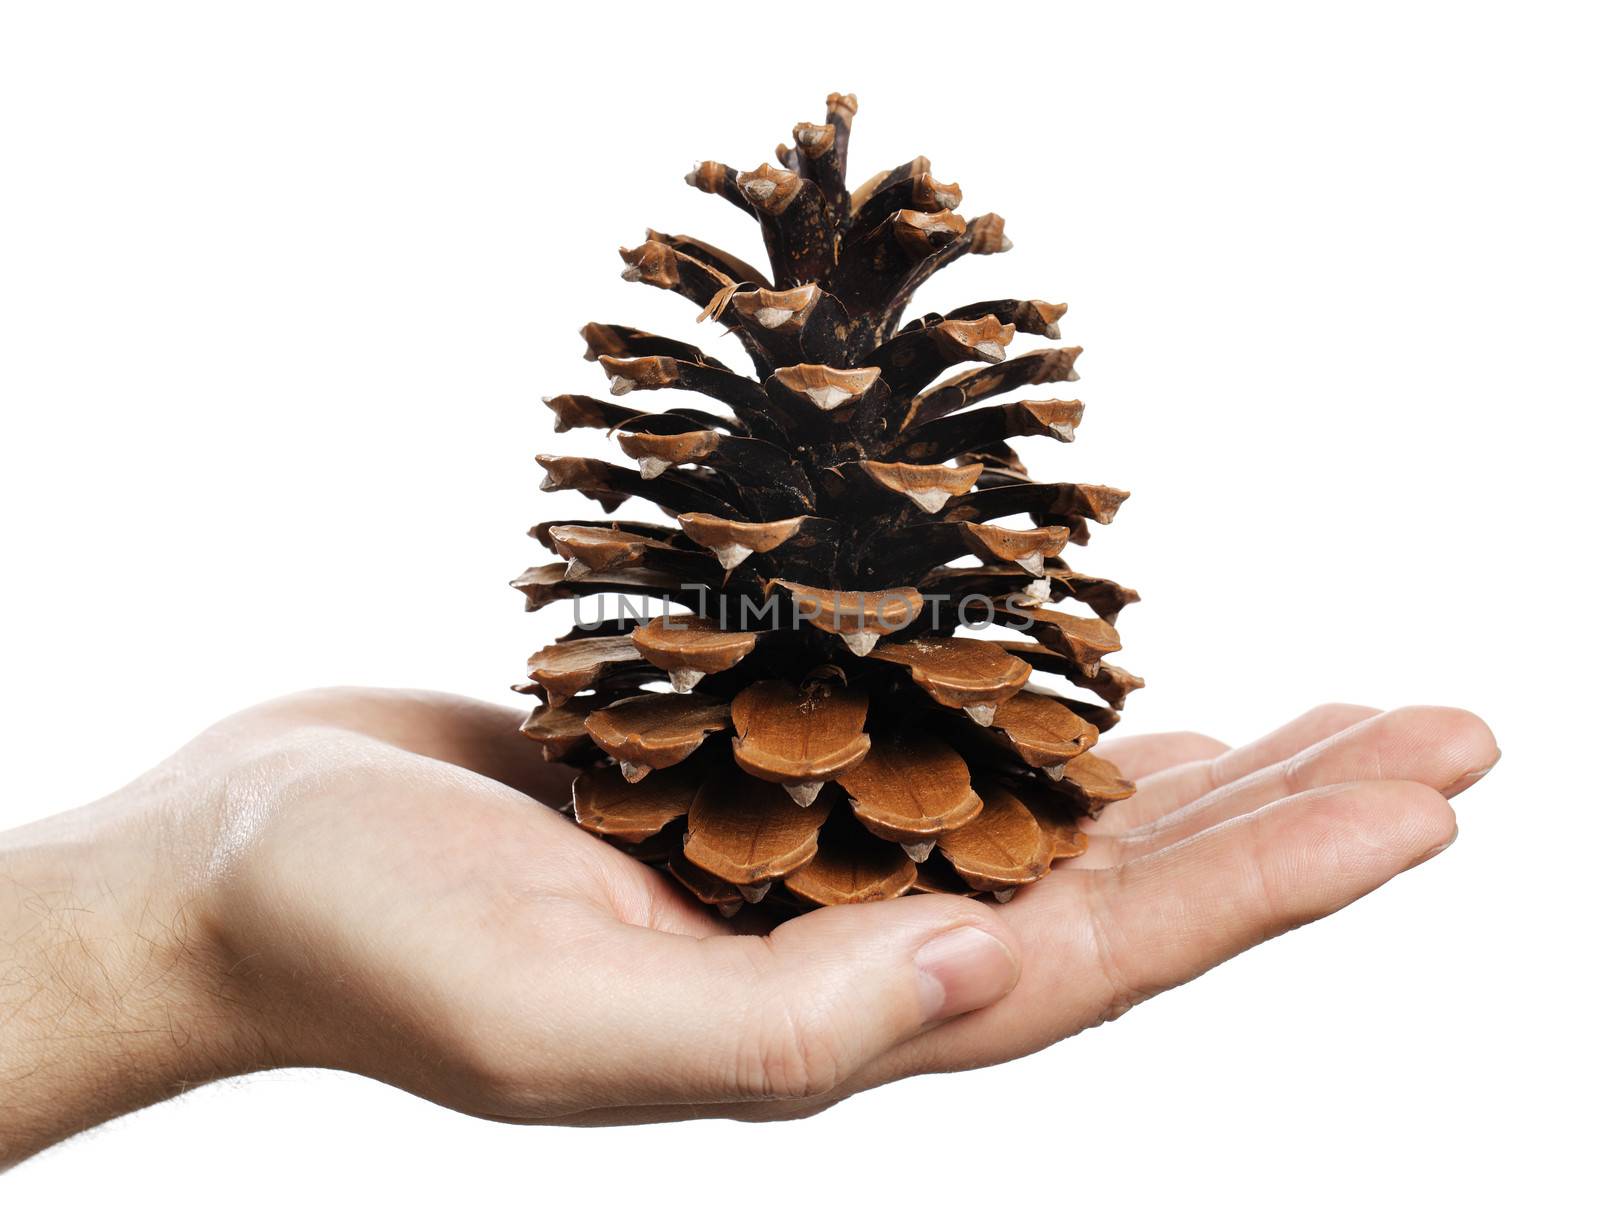 Man holding a large pine cone in his hand.